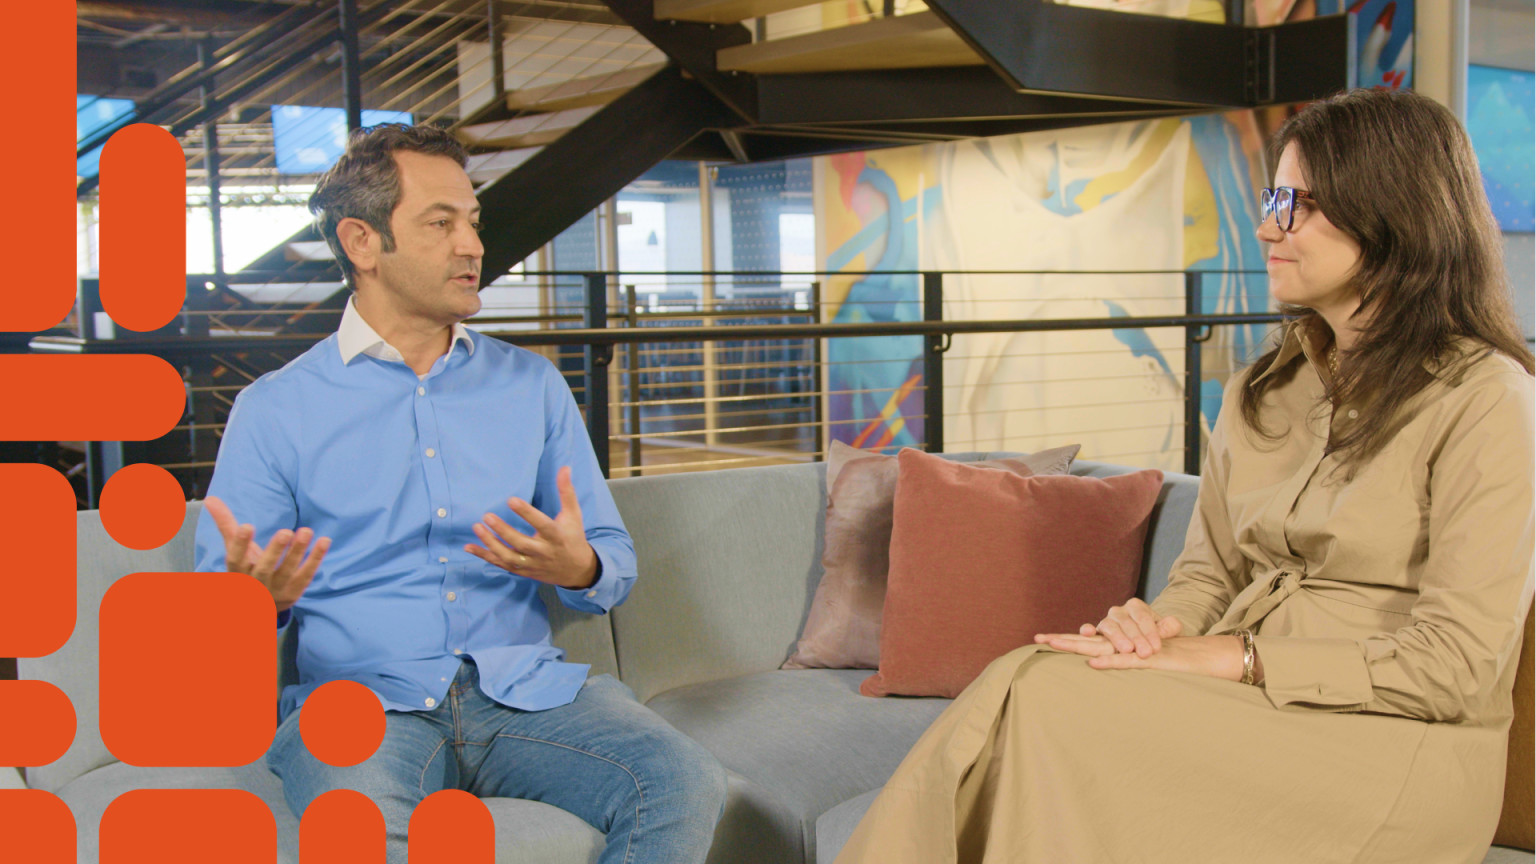 Contentful Co-founder and CTO Paolo Negri chats with the company’s CMO Amy Kilpatrick, reflecting on their roles as key stakeholders in digital teams. 